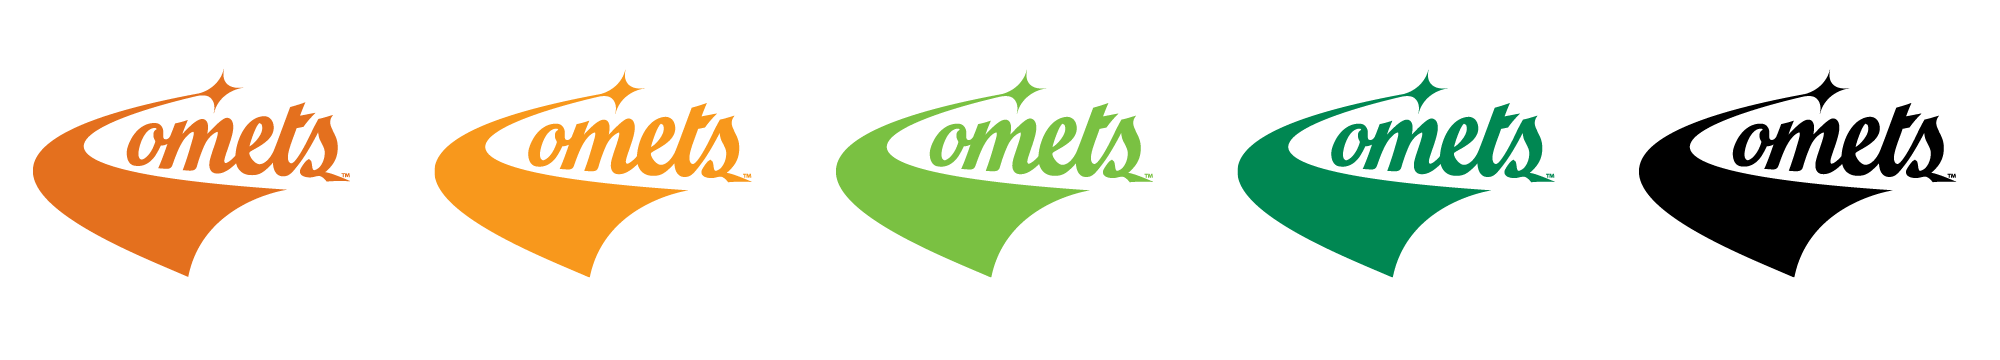 Comets Logo - Specialty Logos - Brand Standards - The University of Texas at Dallas